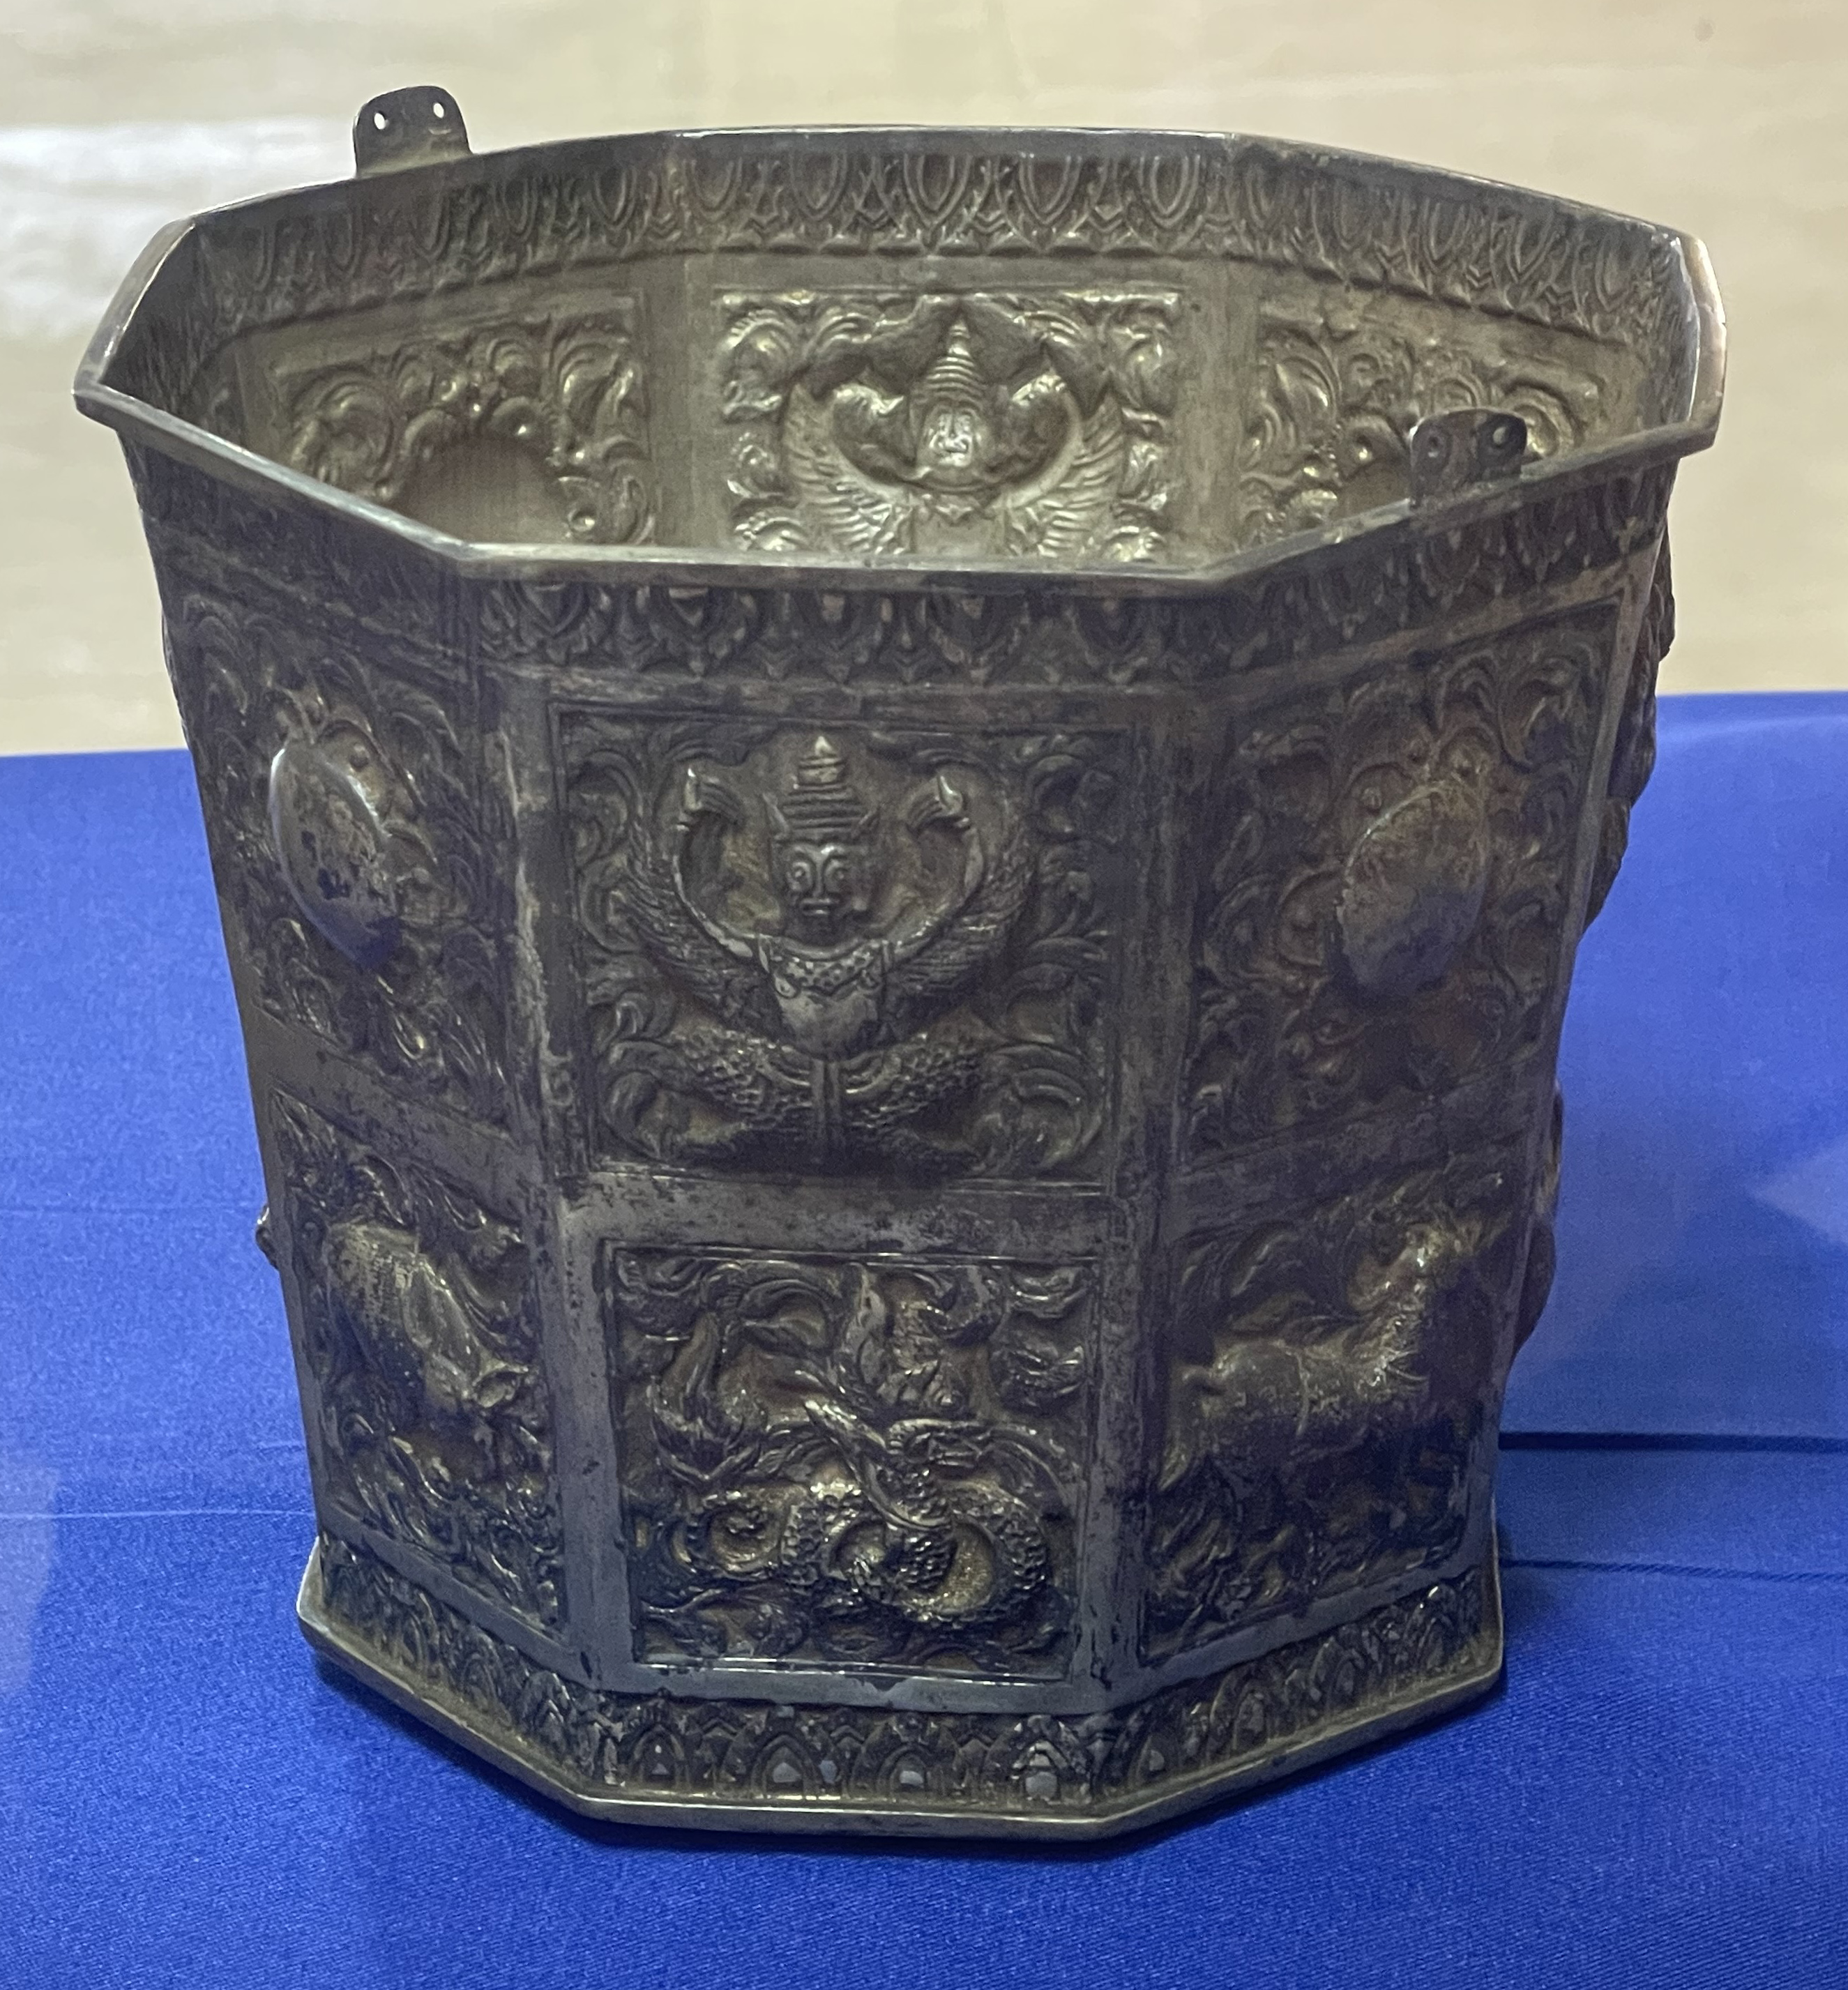 07 Octagonal vessel made of silver with decoration 